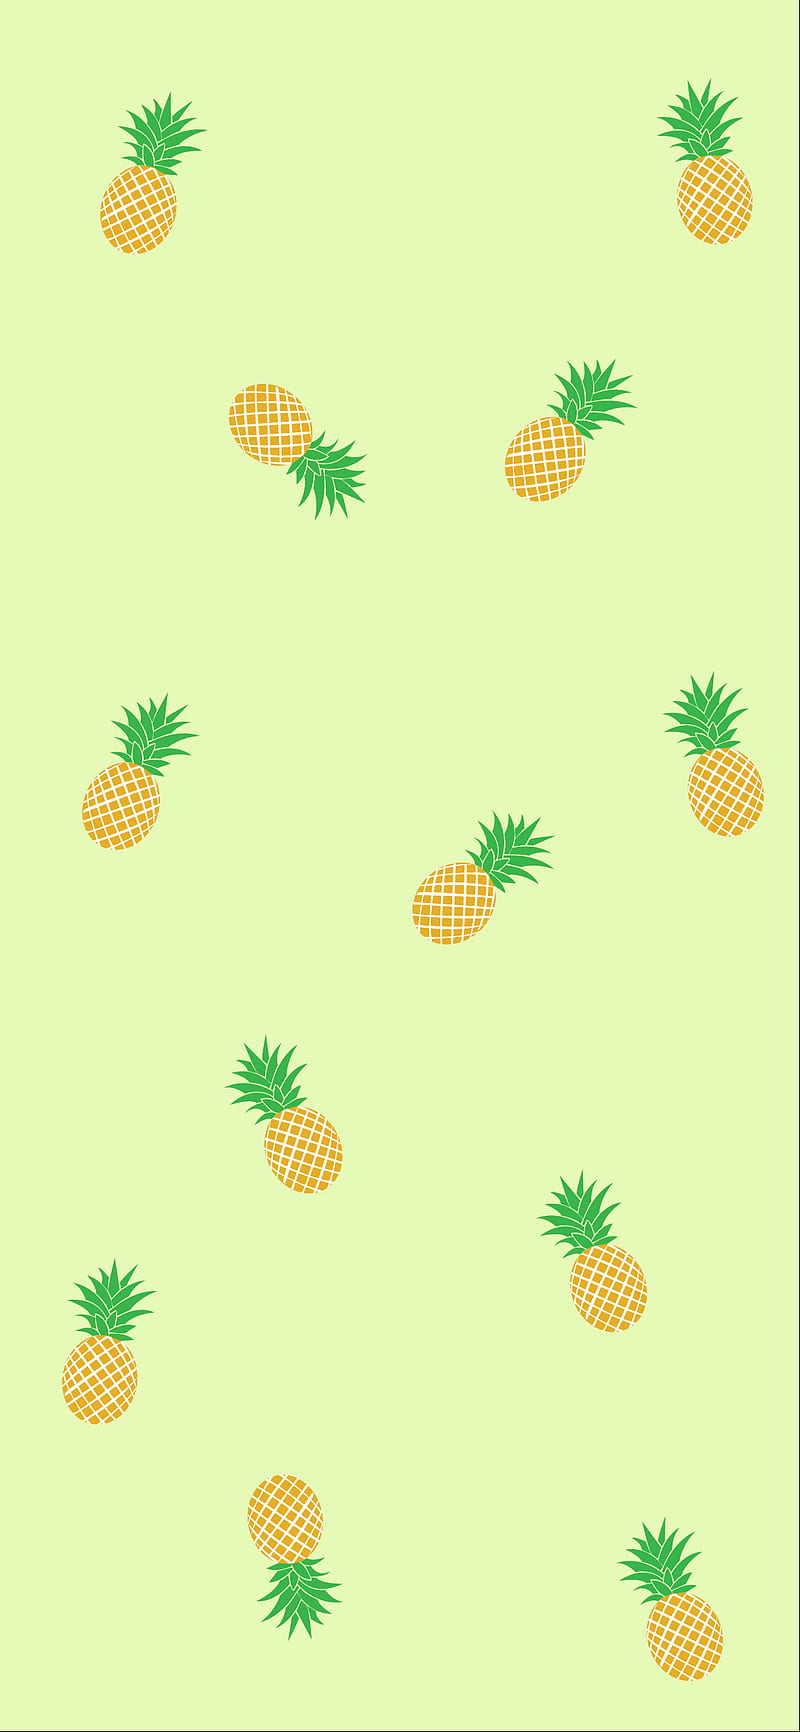 9 iPhone Wallpapers For People Who Need More Vitamin Sea  Preppy Wallpapers   Iphone wallpaper sea Ocean wallpaper Iphone wallpaper